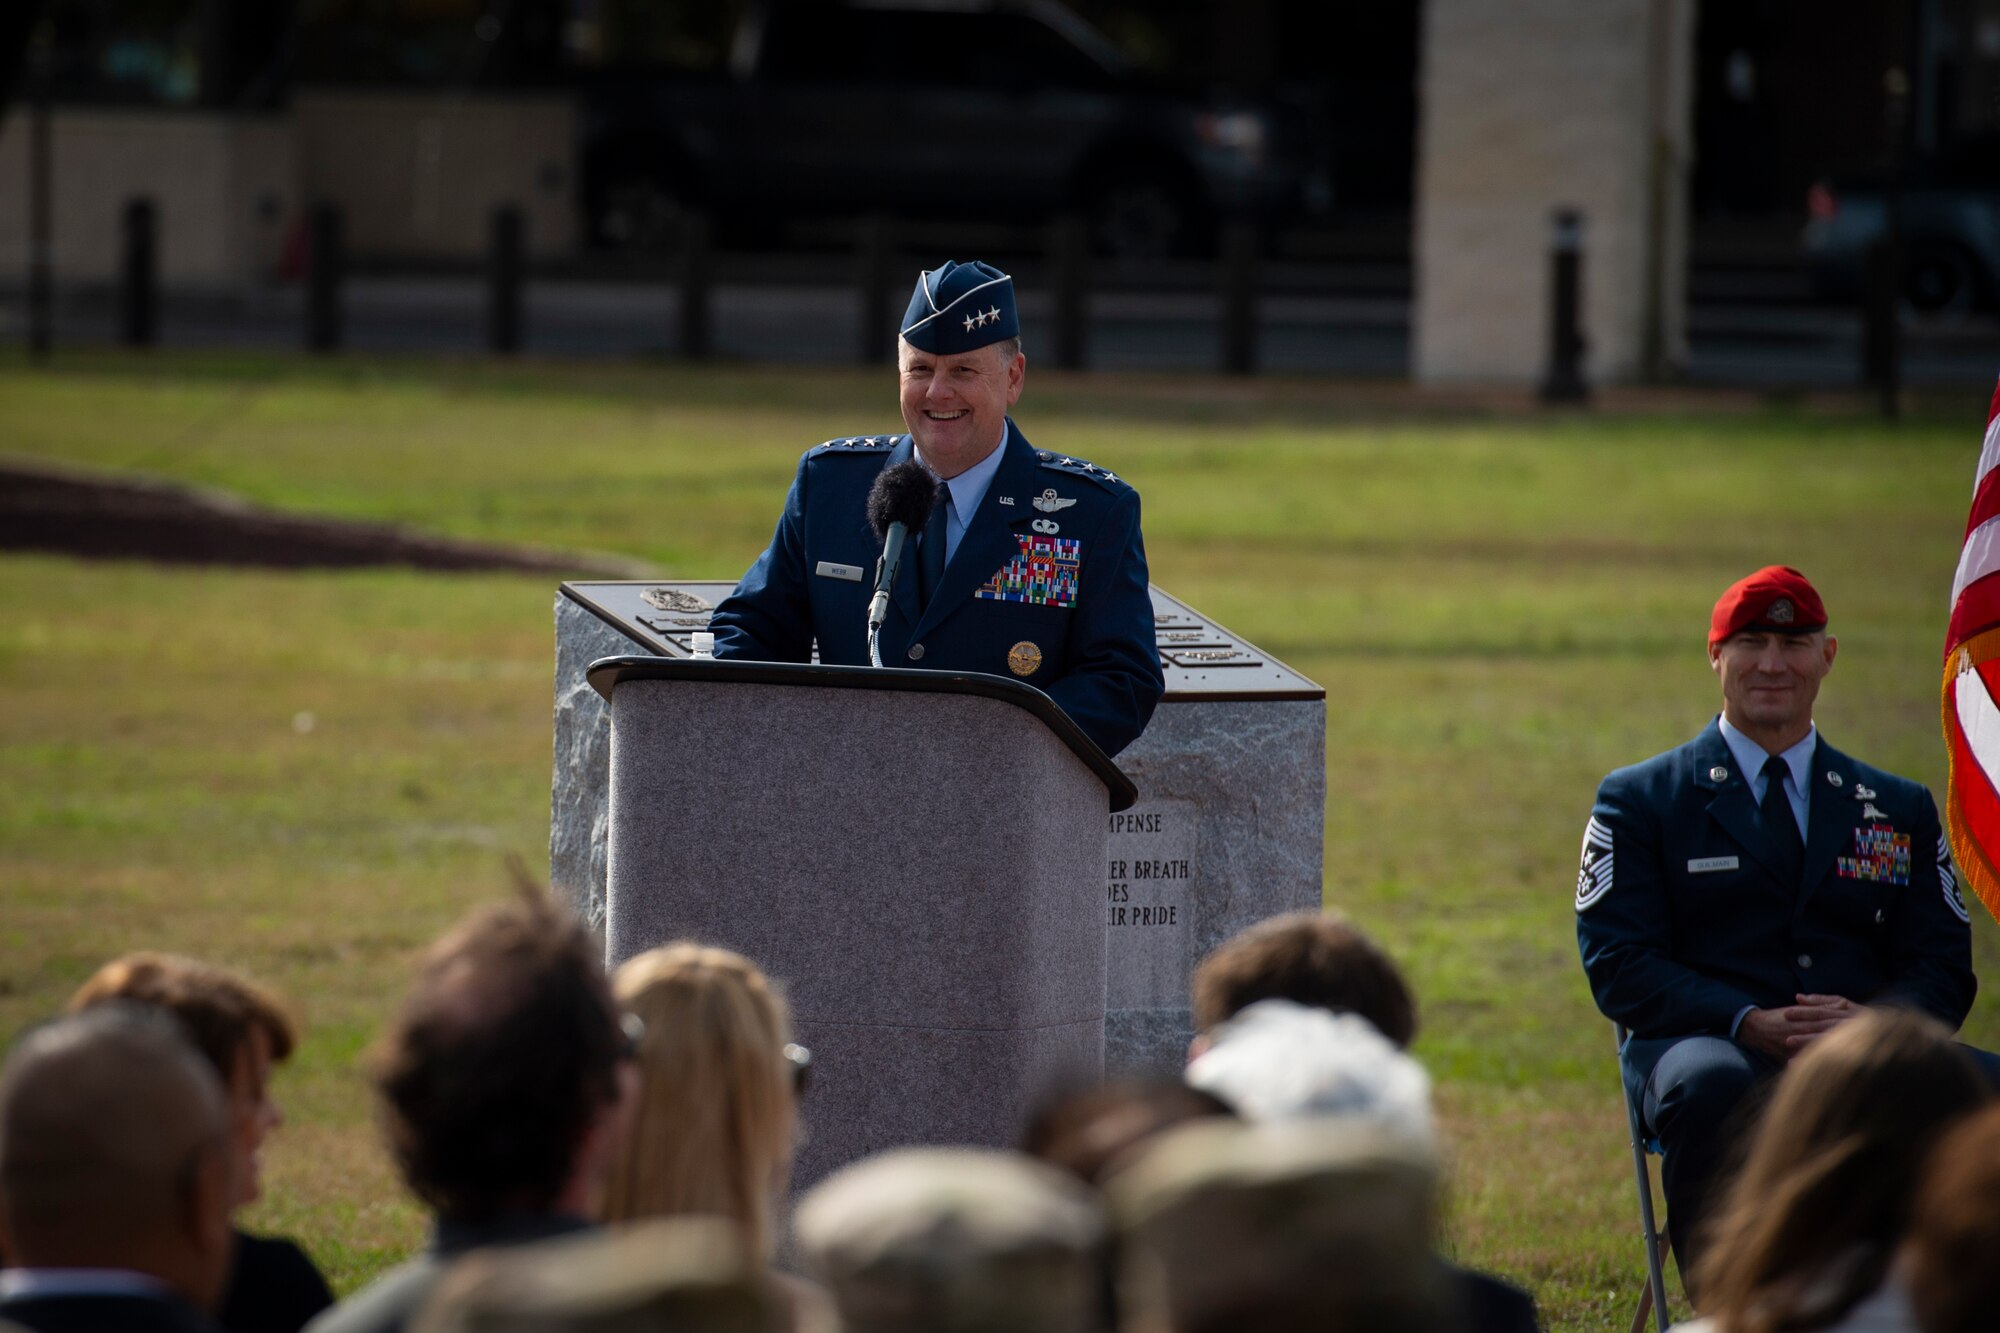 U.S. Air Force Lt. Gen. Brad Webb, commander of Air Force Special Operations Command, gives remarks during the promotion ceremony of U.S. Air Force Col. Claude K. Tudor, Jr., at Hurlburt Field, Florida, Feb. 8, 2019.